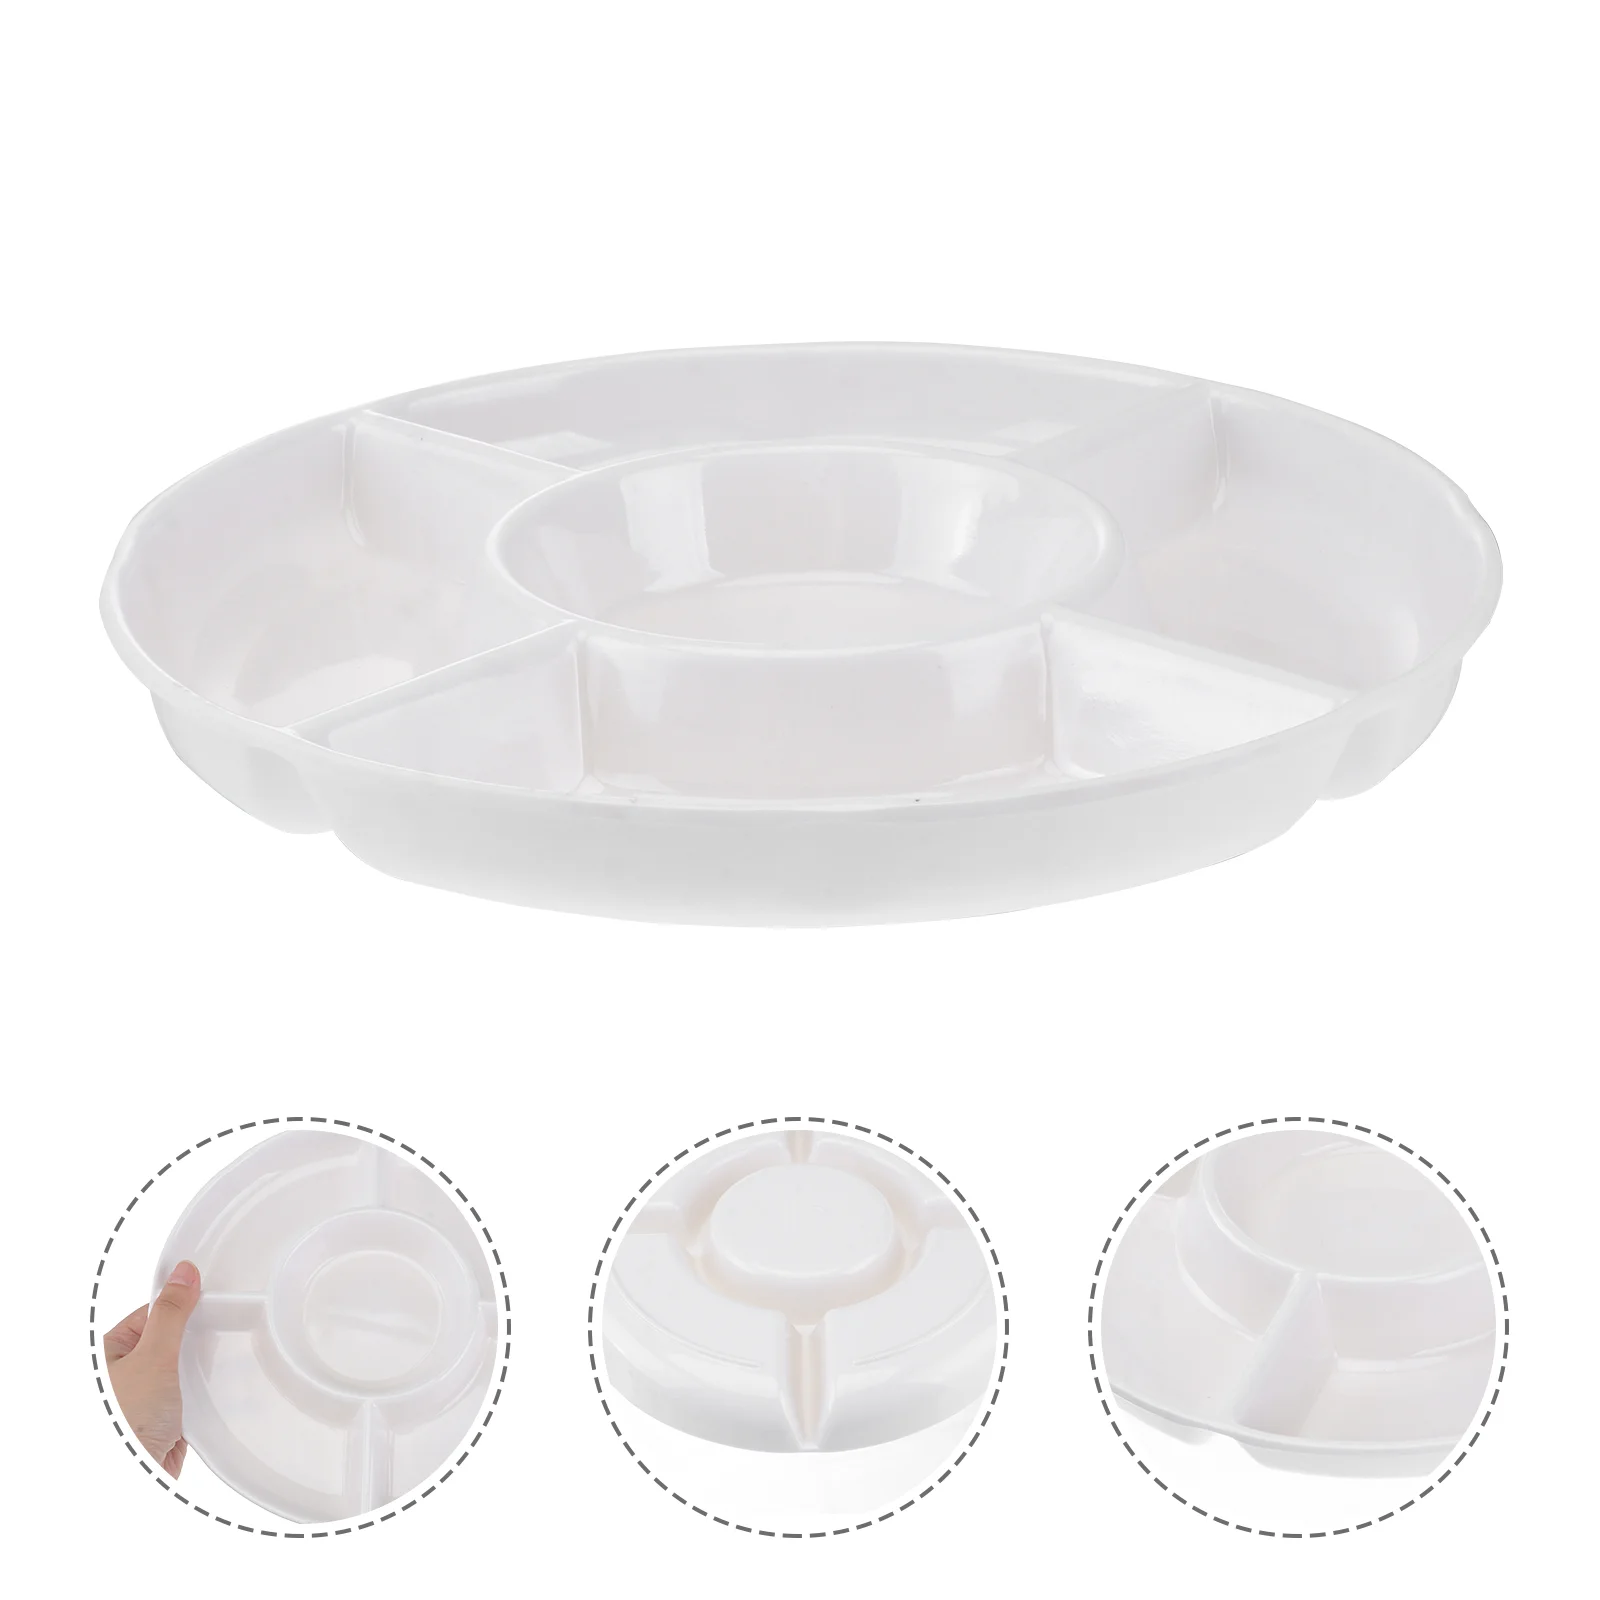 

Serving Tray Divided Appetizer Plate Melamine Dish Fruit Platter Snack Candy Food Party Trays Compartment Set Plates Dip Chip